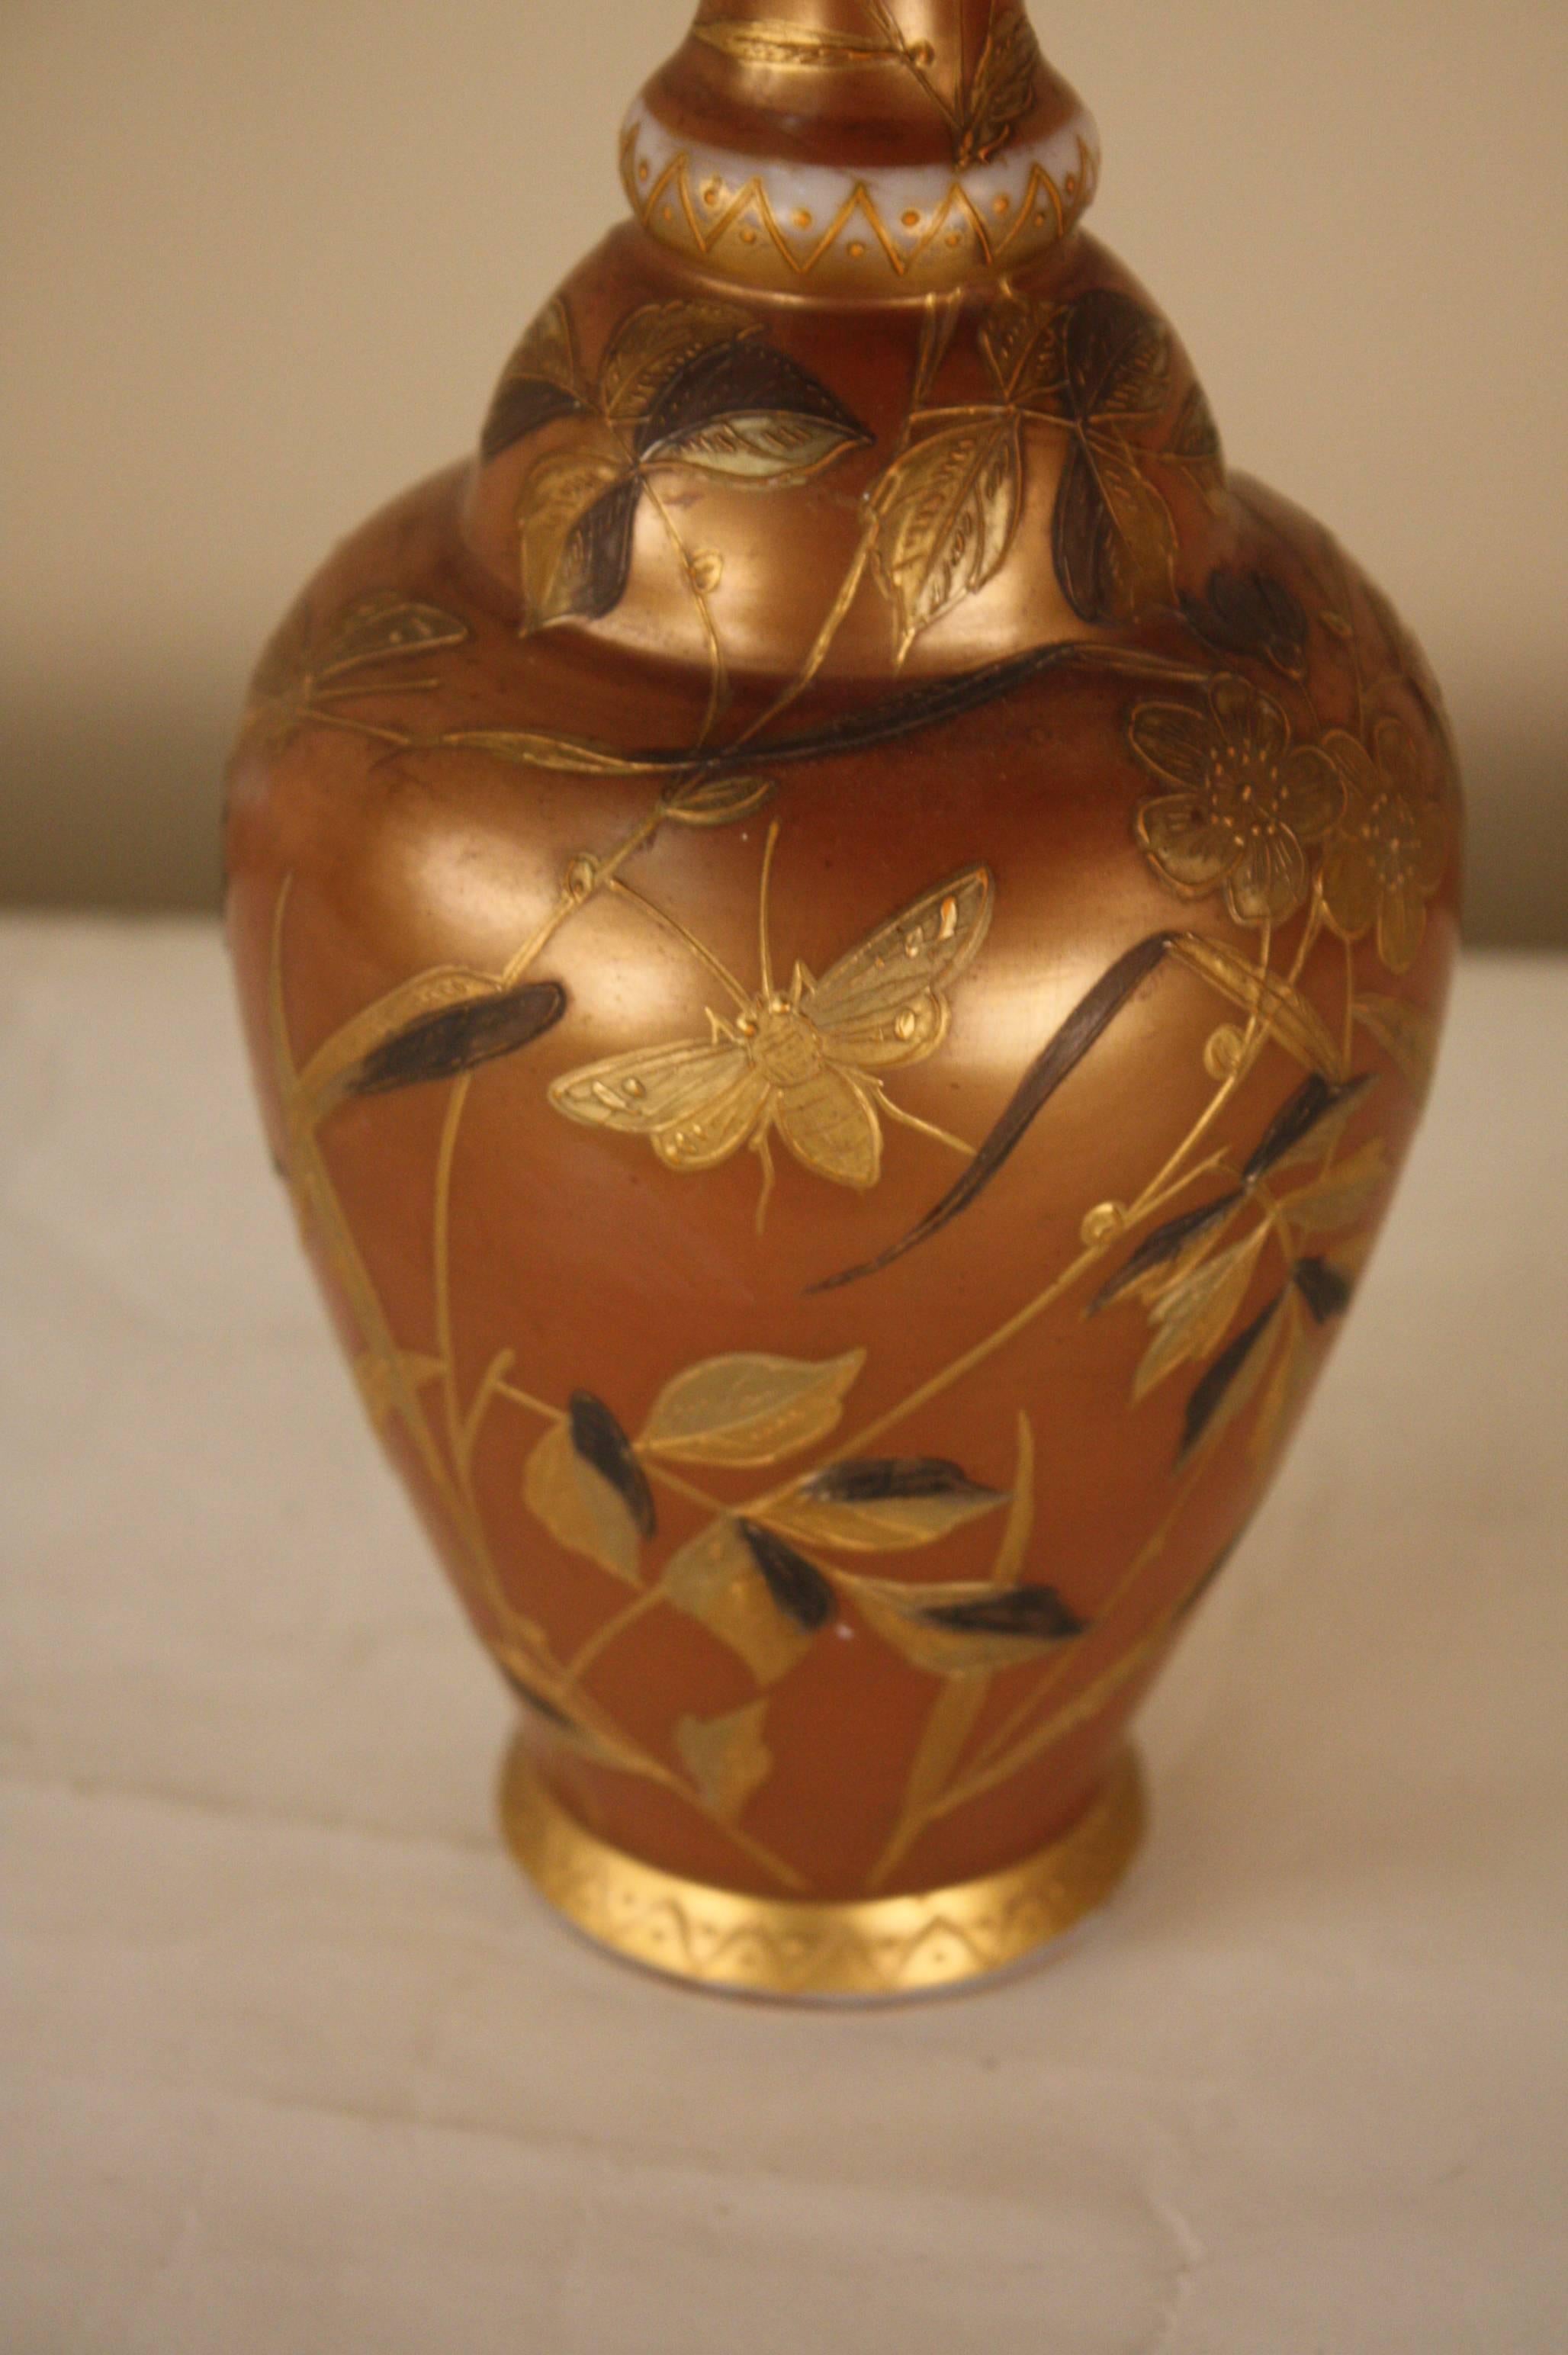 A French opaline glass vase with Art Nouveau beautifully hand painting that has oriental style influence.